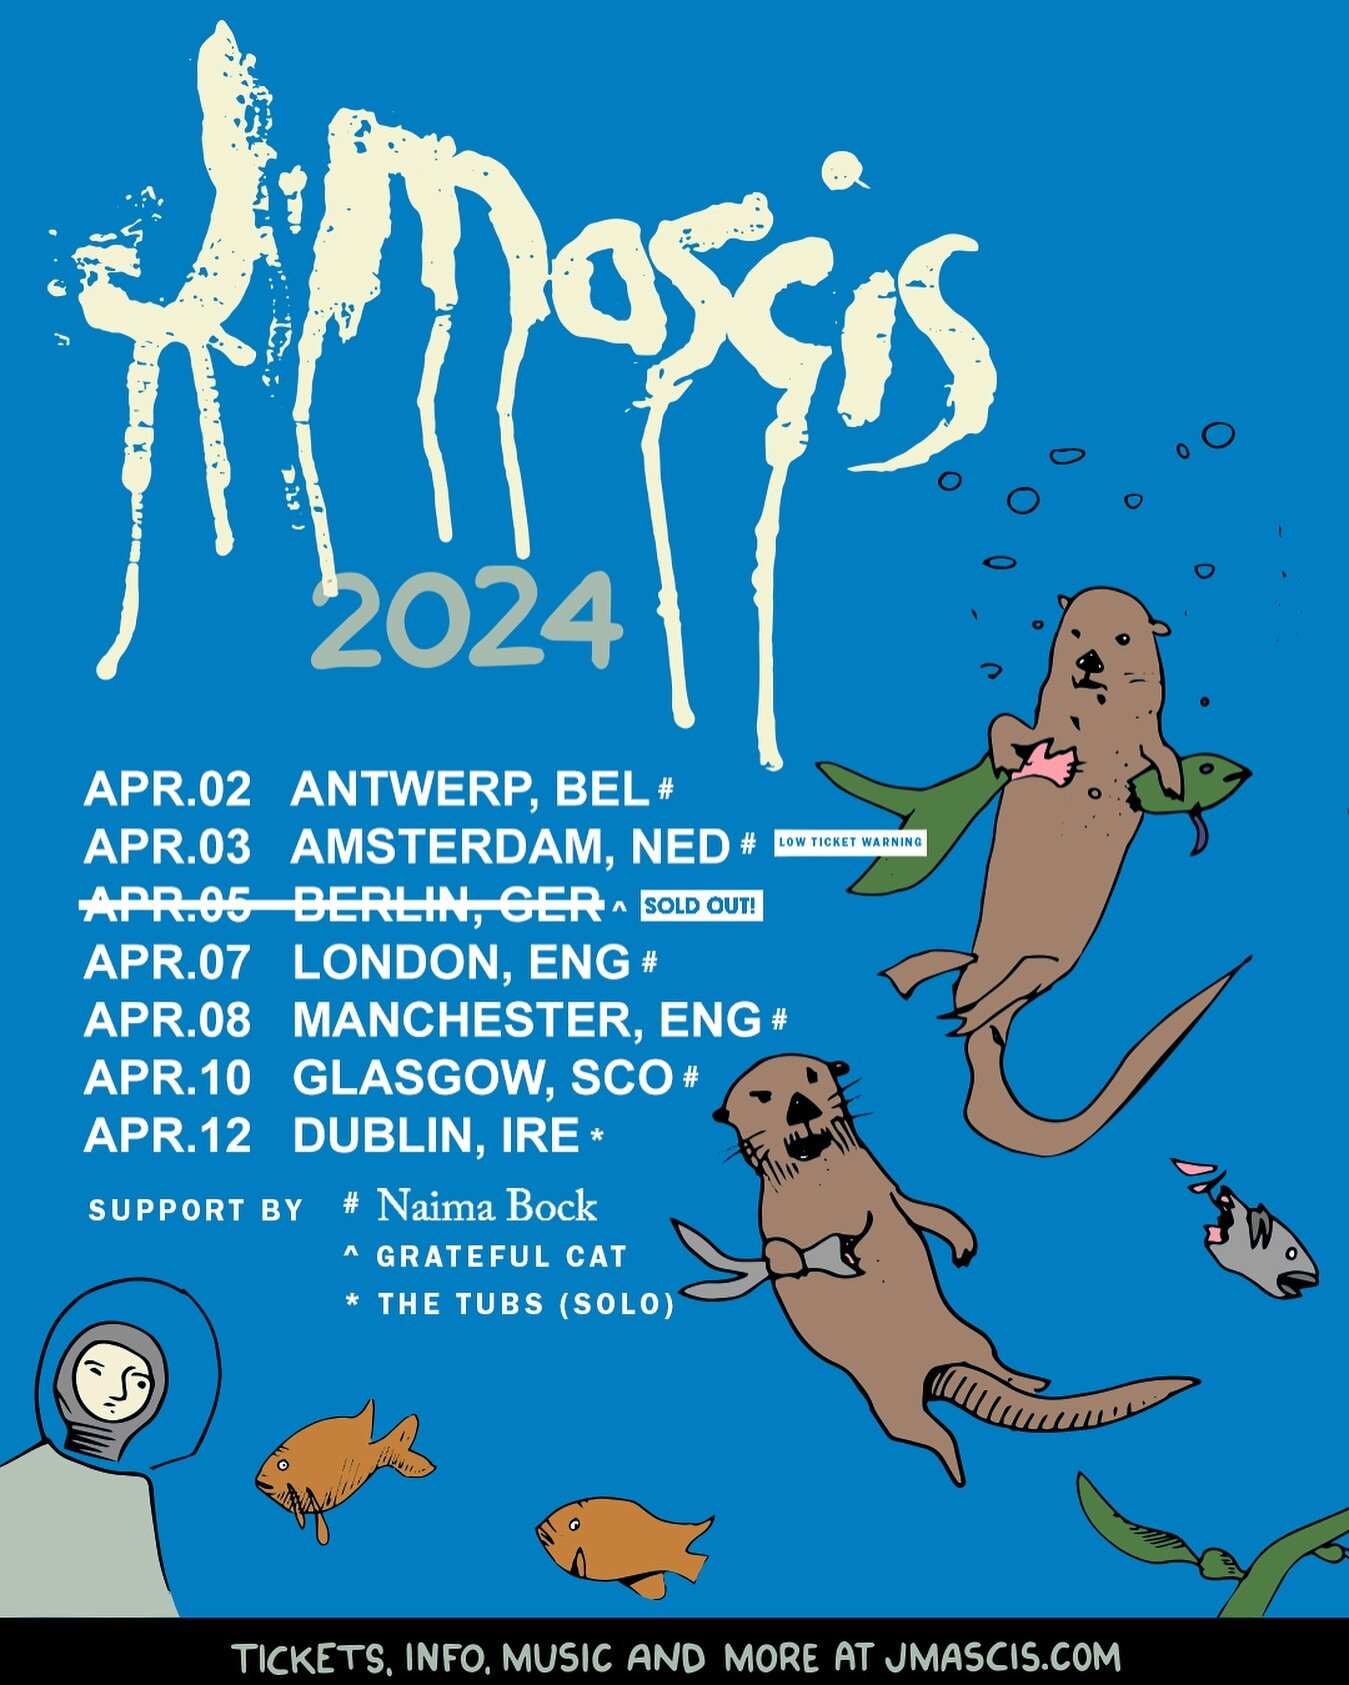 Catch J Mascis in Europe/UK with @naimabock, @grateful_cat_band, @_the_tubs_ (solo)

4/2 Antwerp, Belgium @trix_online
4/3 Amsterdam, Netherlands @paradisoadam - LOW TICKET WARNING
4/5 Berlin, Germany @bukpeteredel - SOLD OUT
4/7 London, England @ear